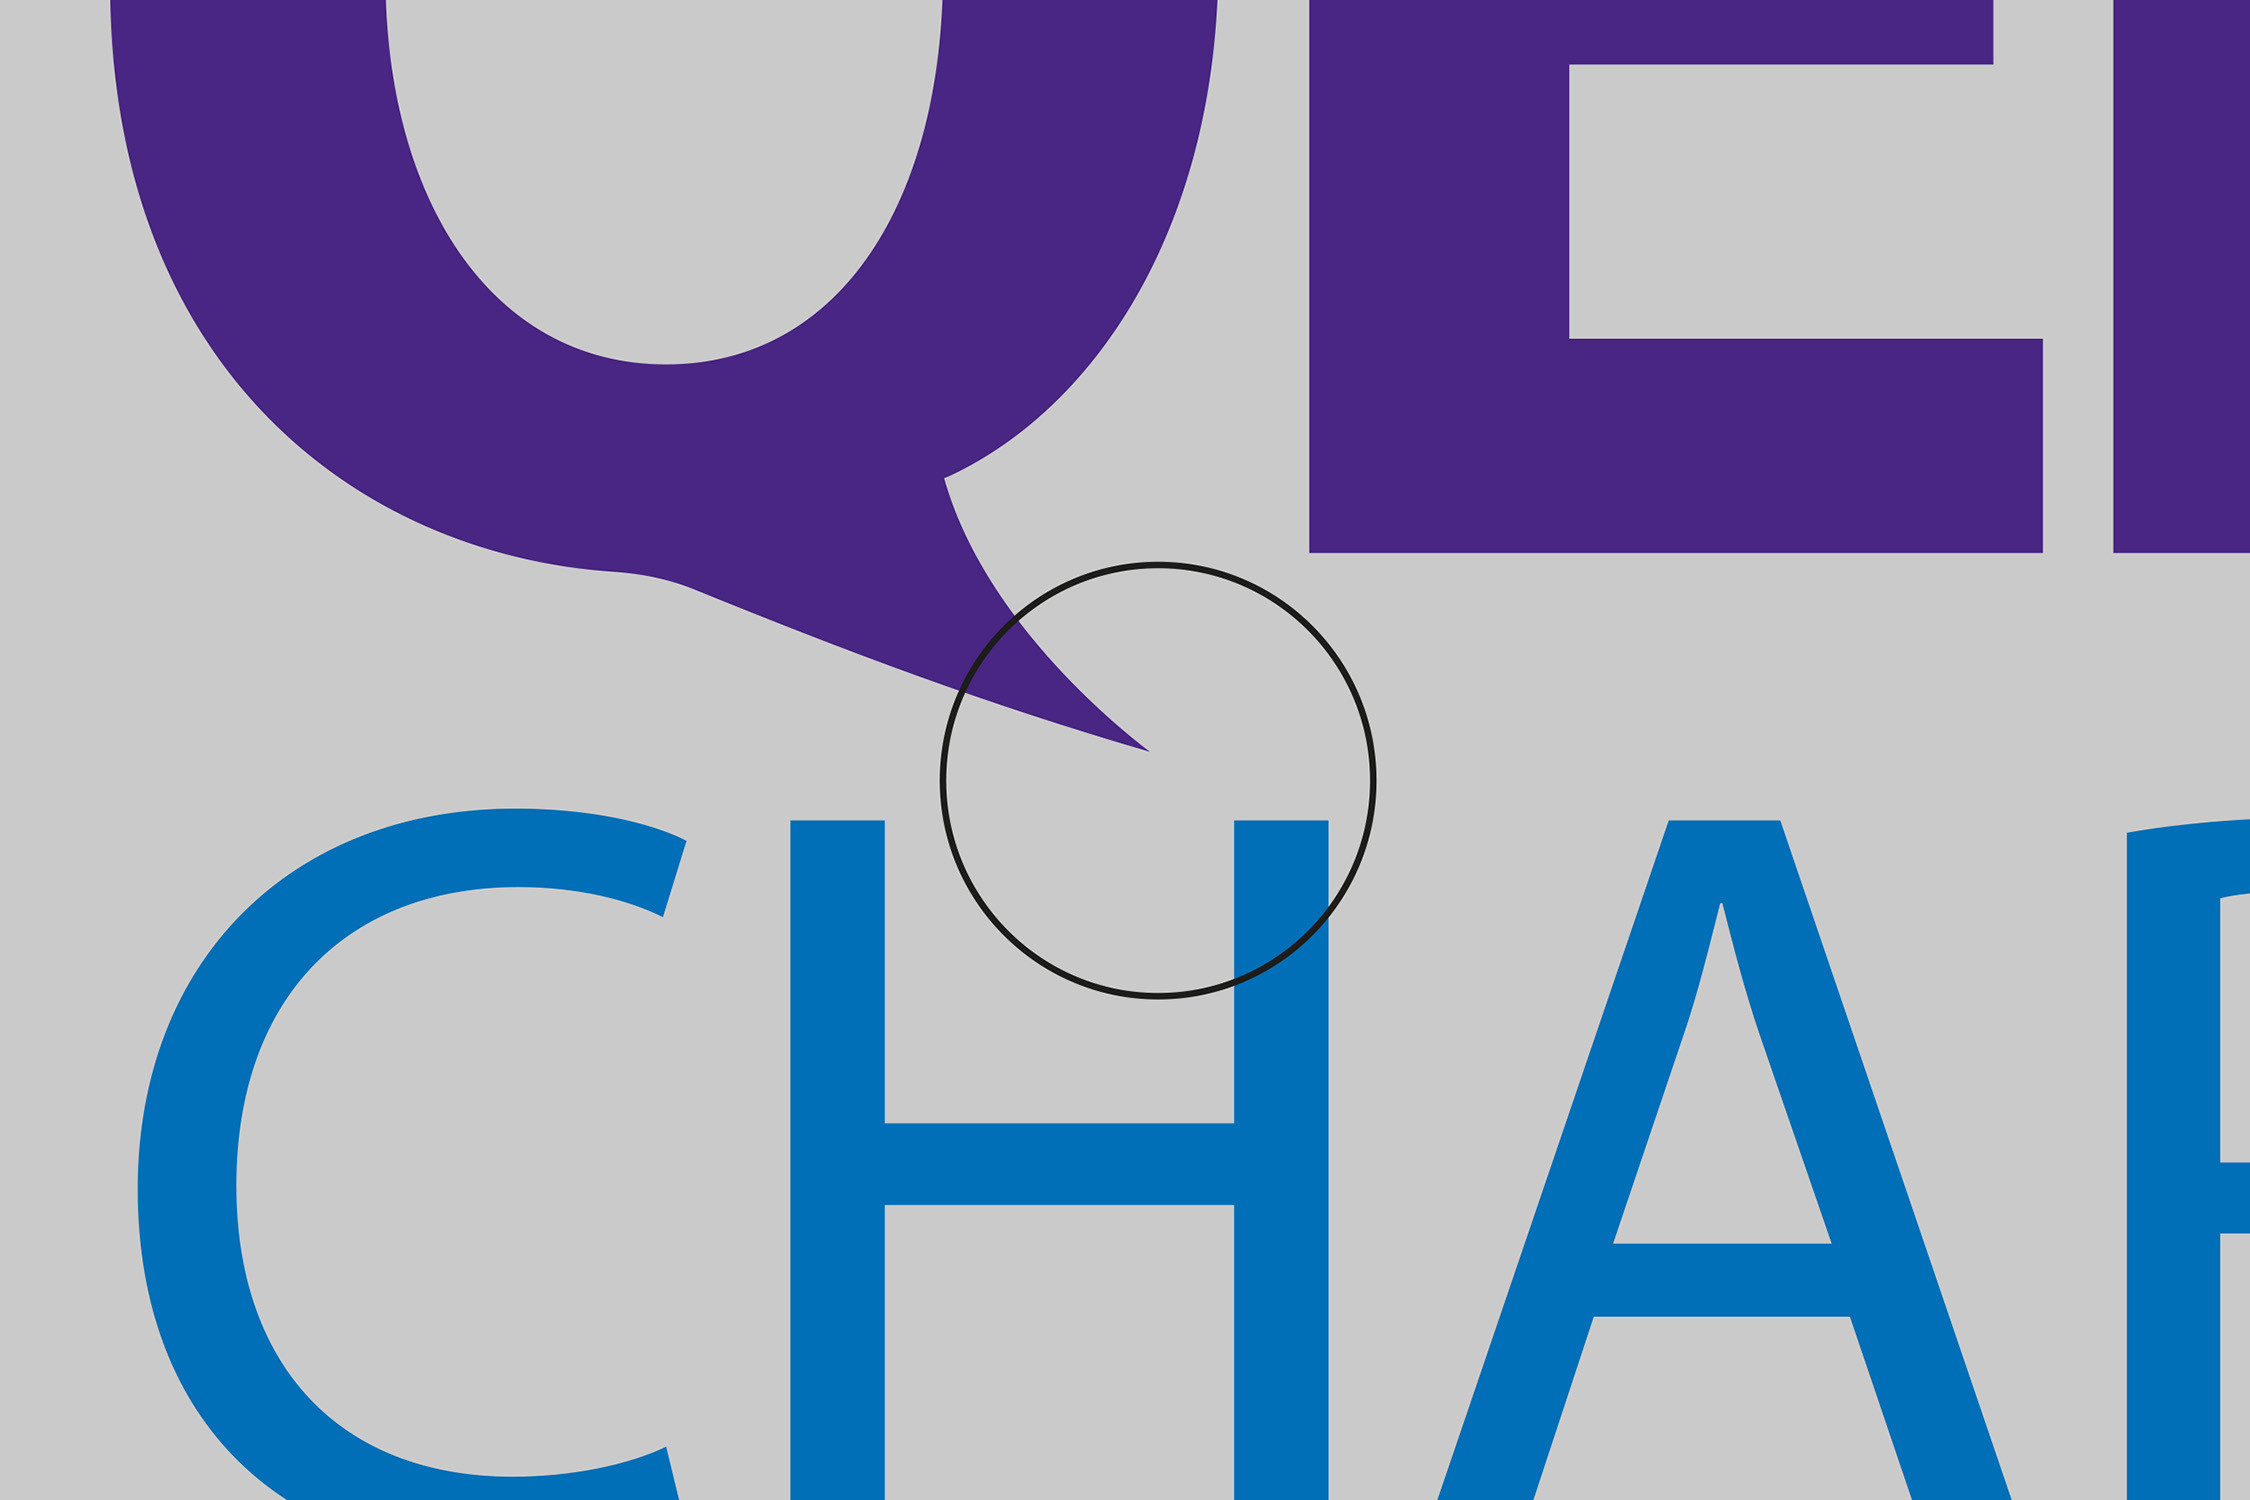 A close-up image showing the customised 'Q' character in place on the 'Compact' logo variant. A thin circle indicates the redrawn letter shape and how it interacts with the rest of the logo.